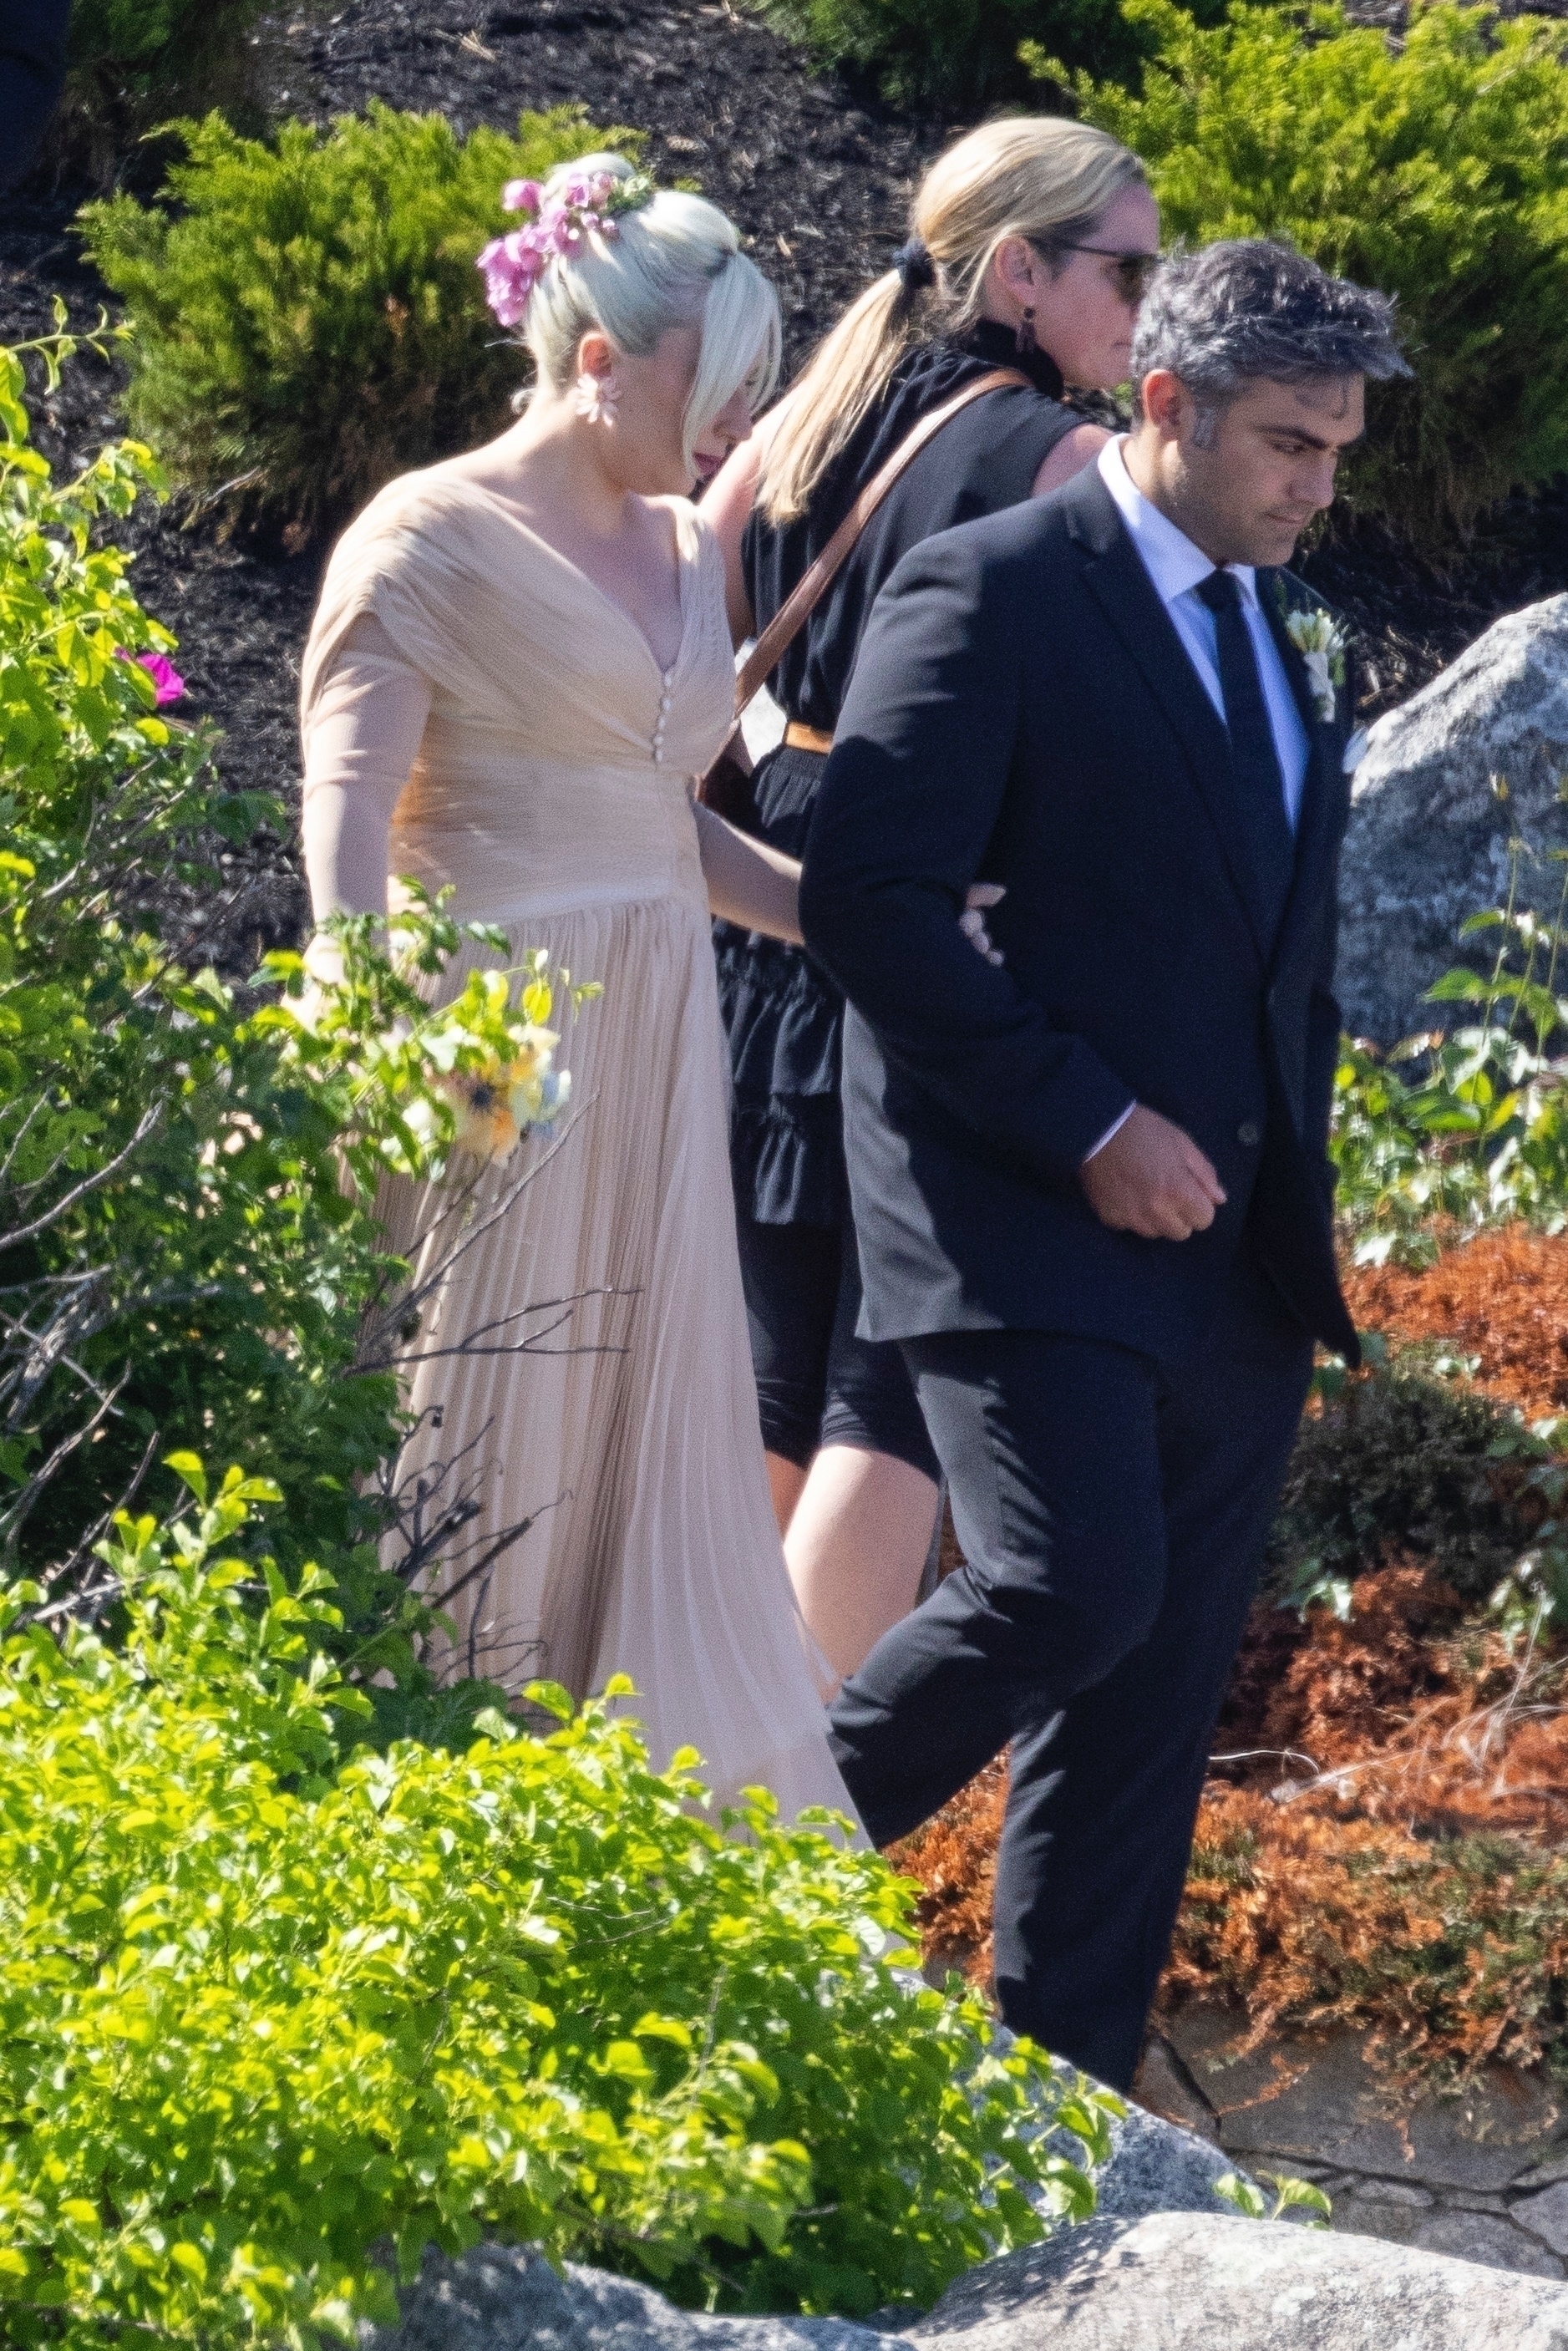 Gaga's beau wore a black tux with a flower attached to his jacket lapel